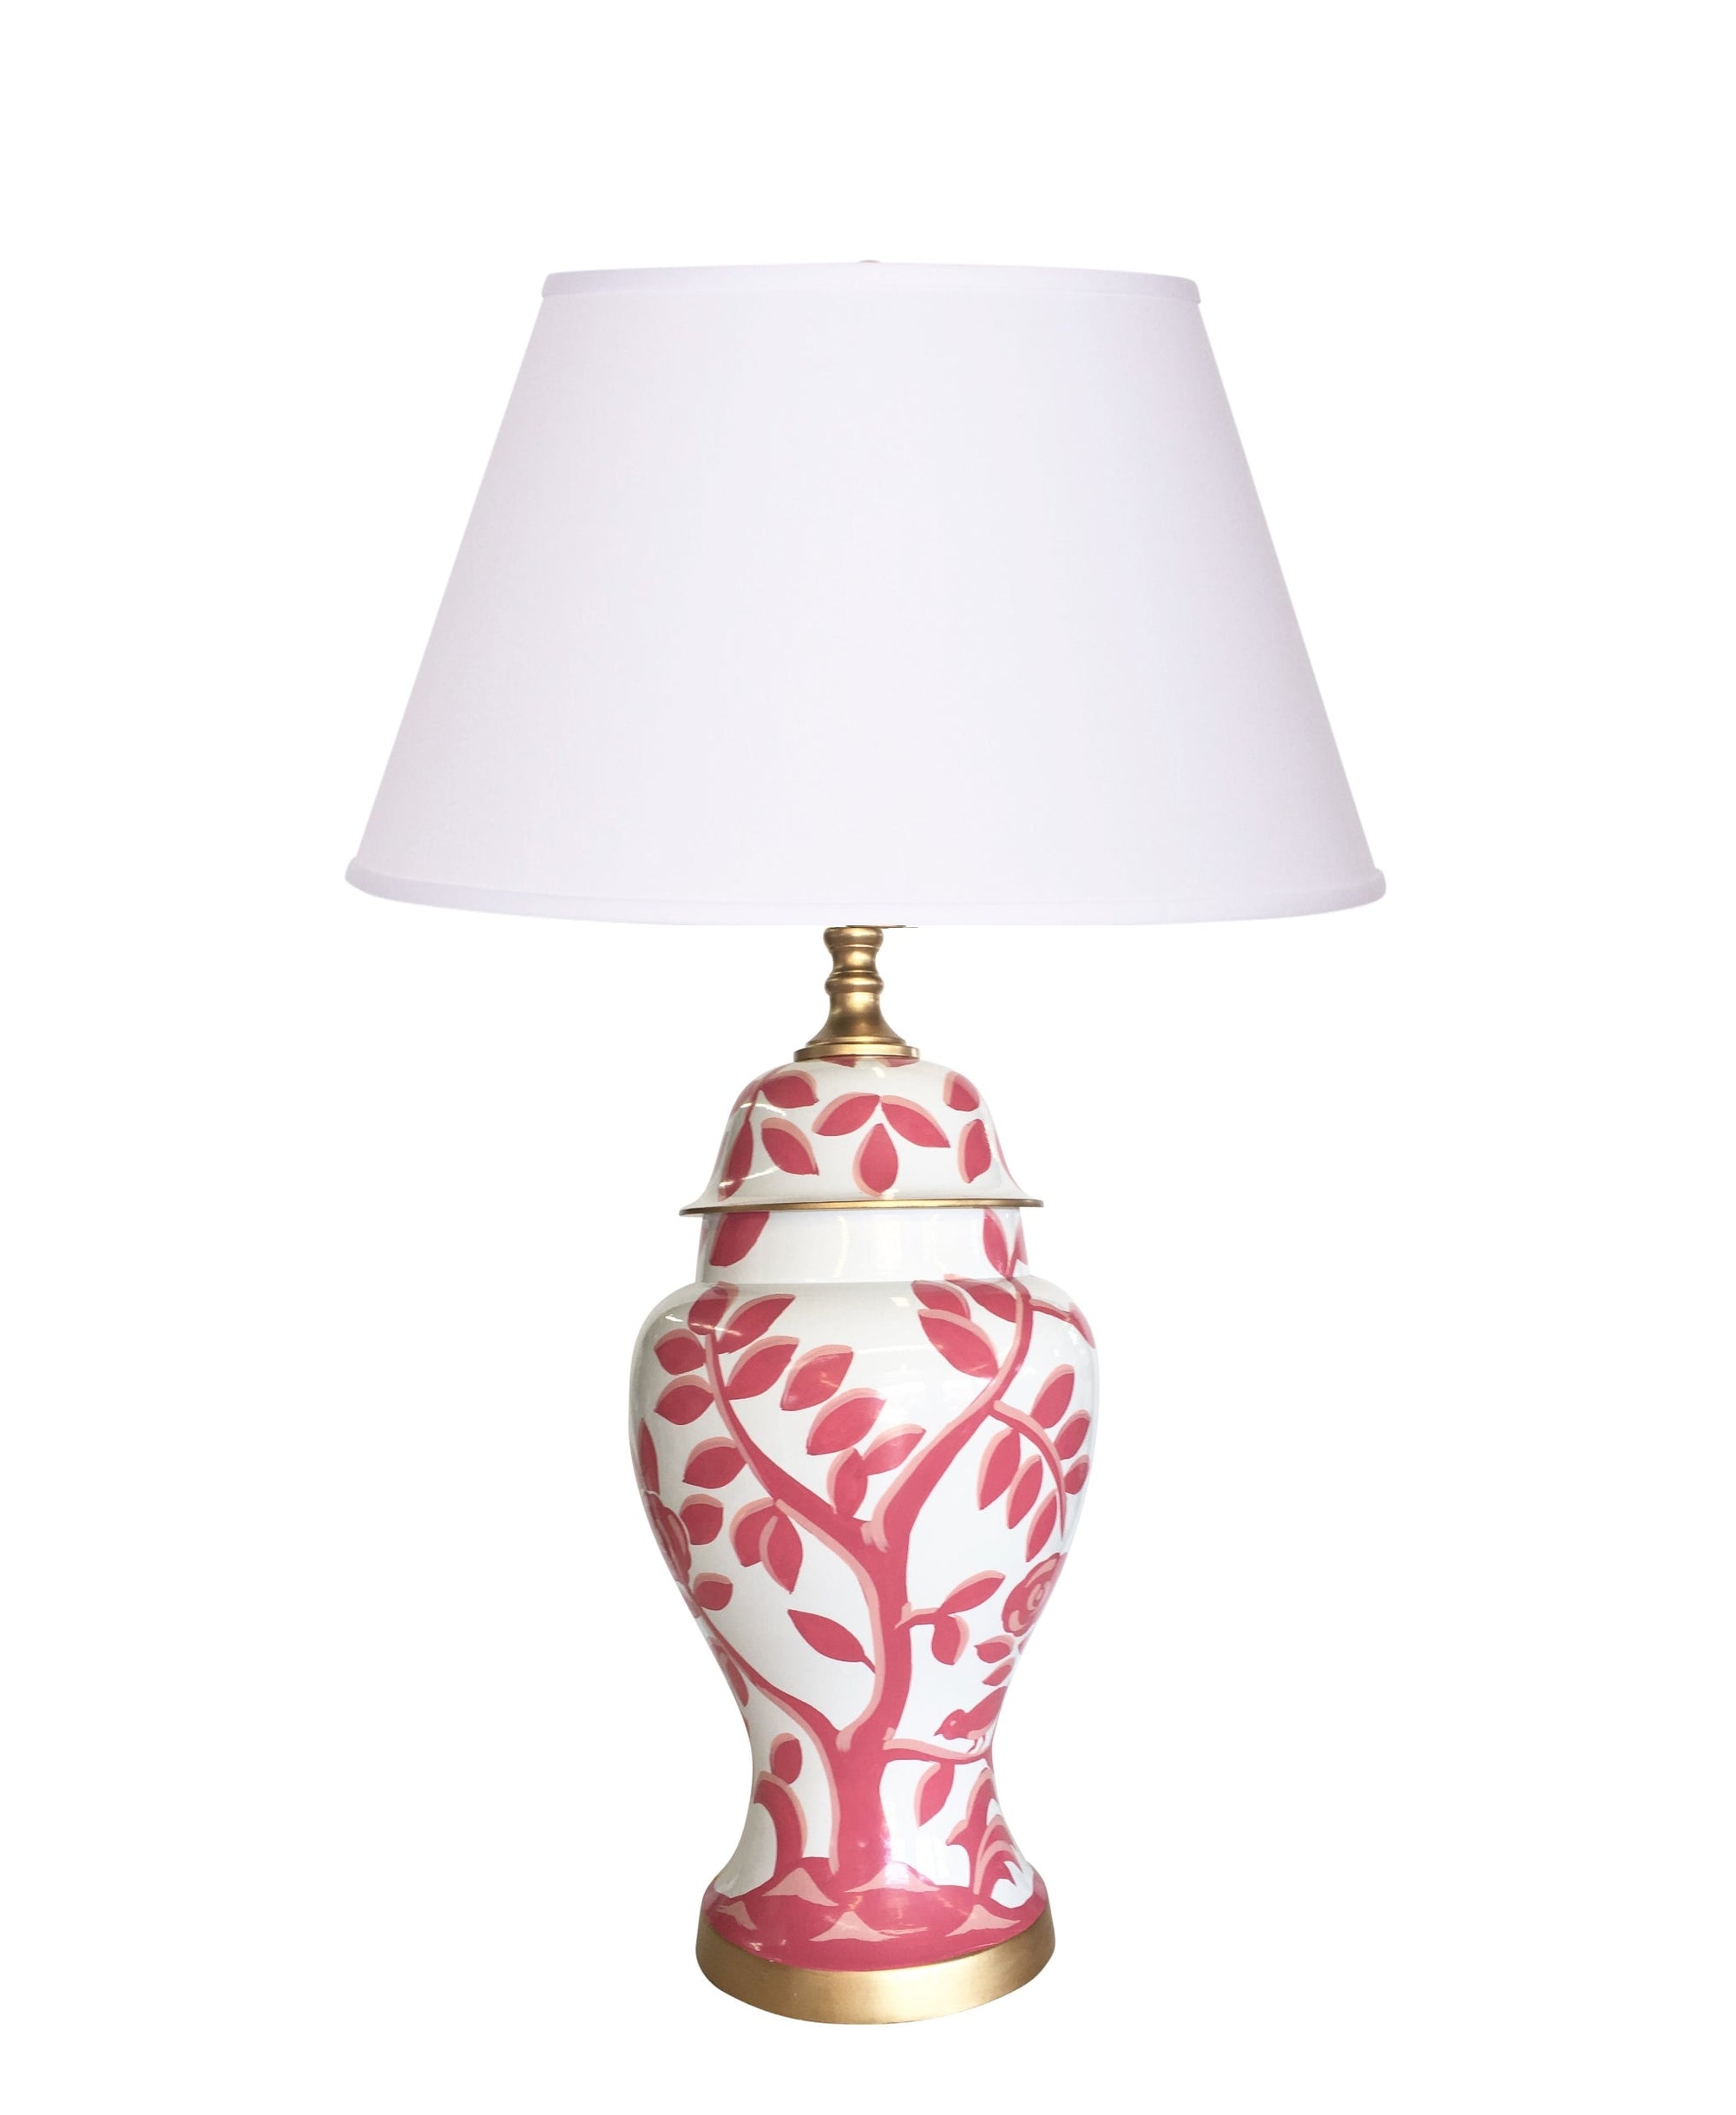 Dana Gibson Cliveden in Pink Lamp, 2ndQ